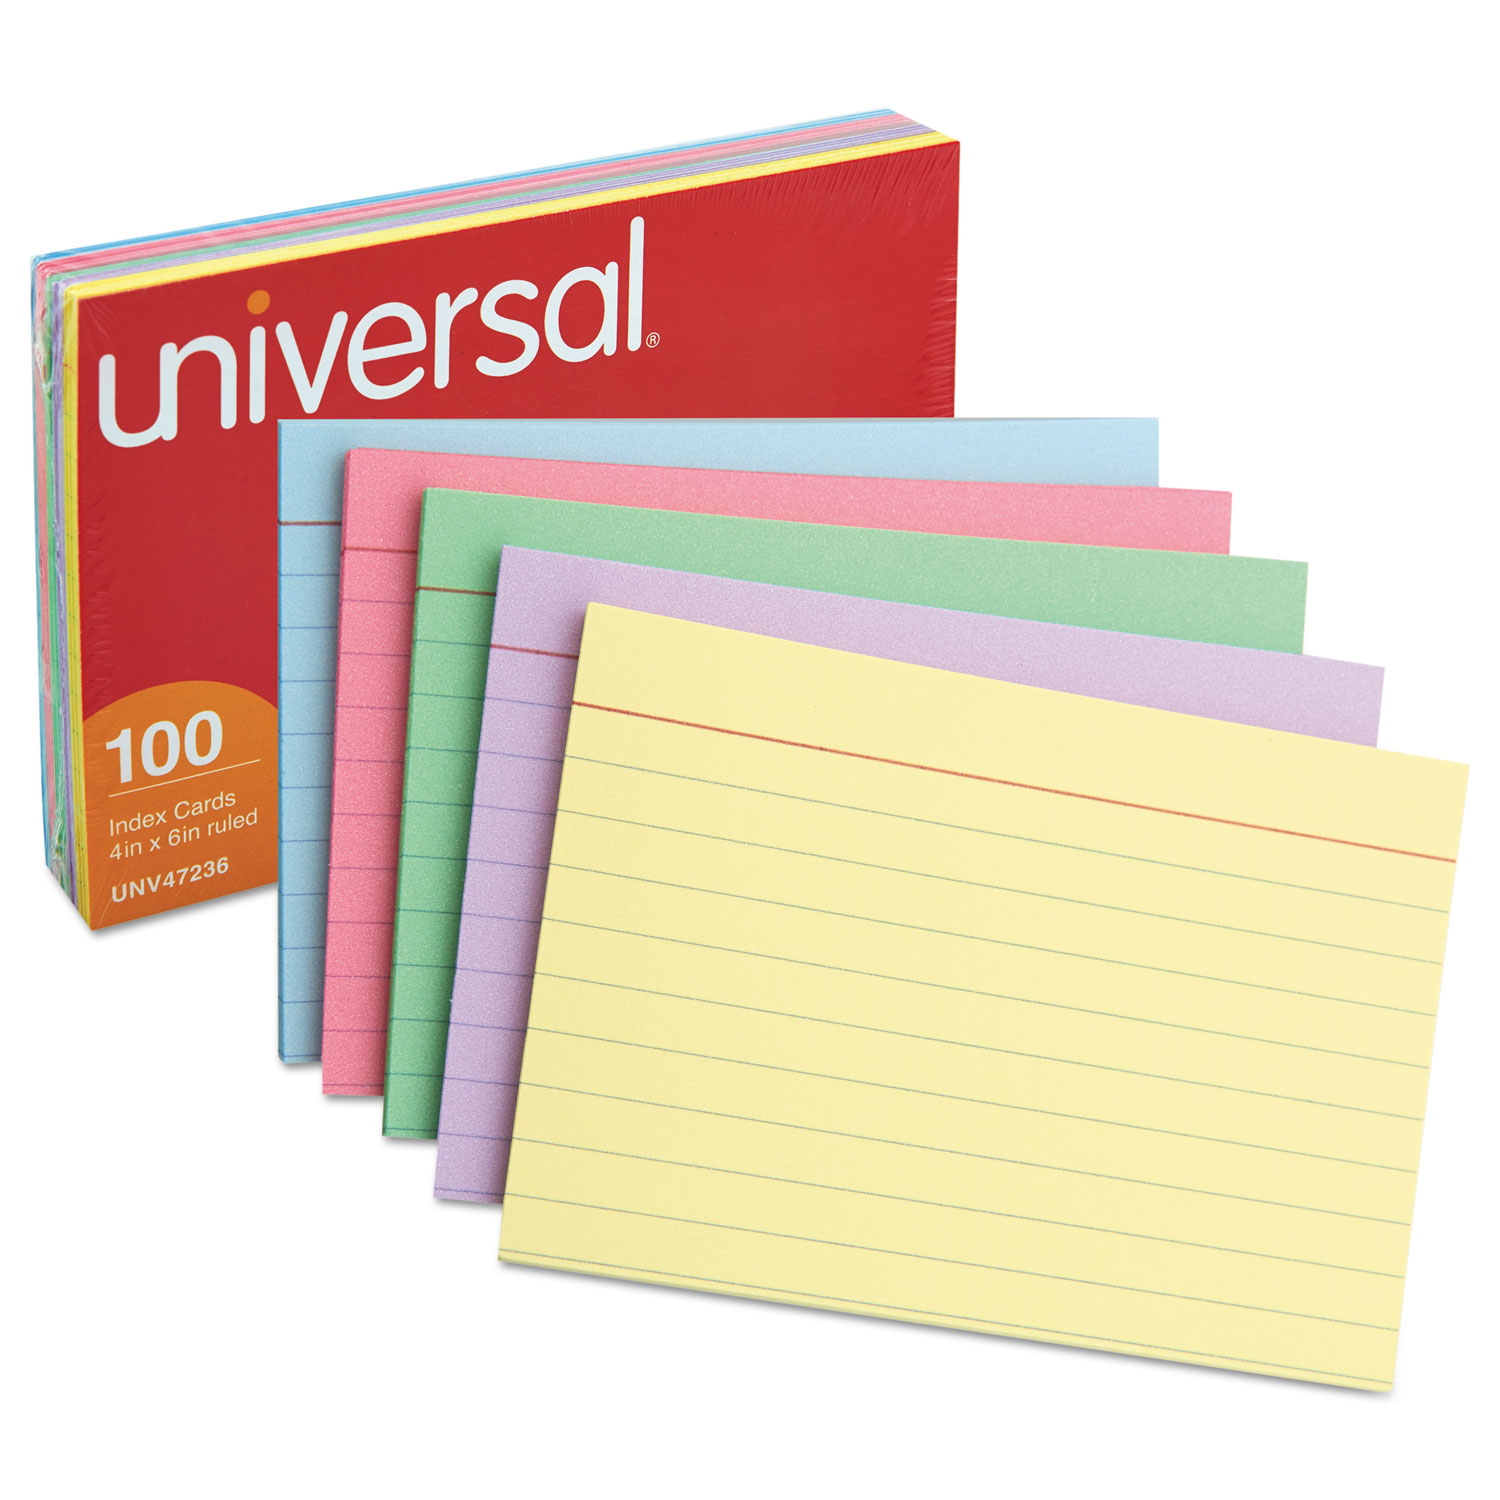 Index Cards, 5 Super Bright Assorted Colors, Unruled, 4 x 6, 100 Cards -  PAC1721, Dixon Ticonderoga Co - Pacon